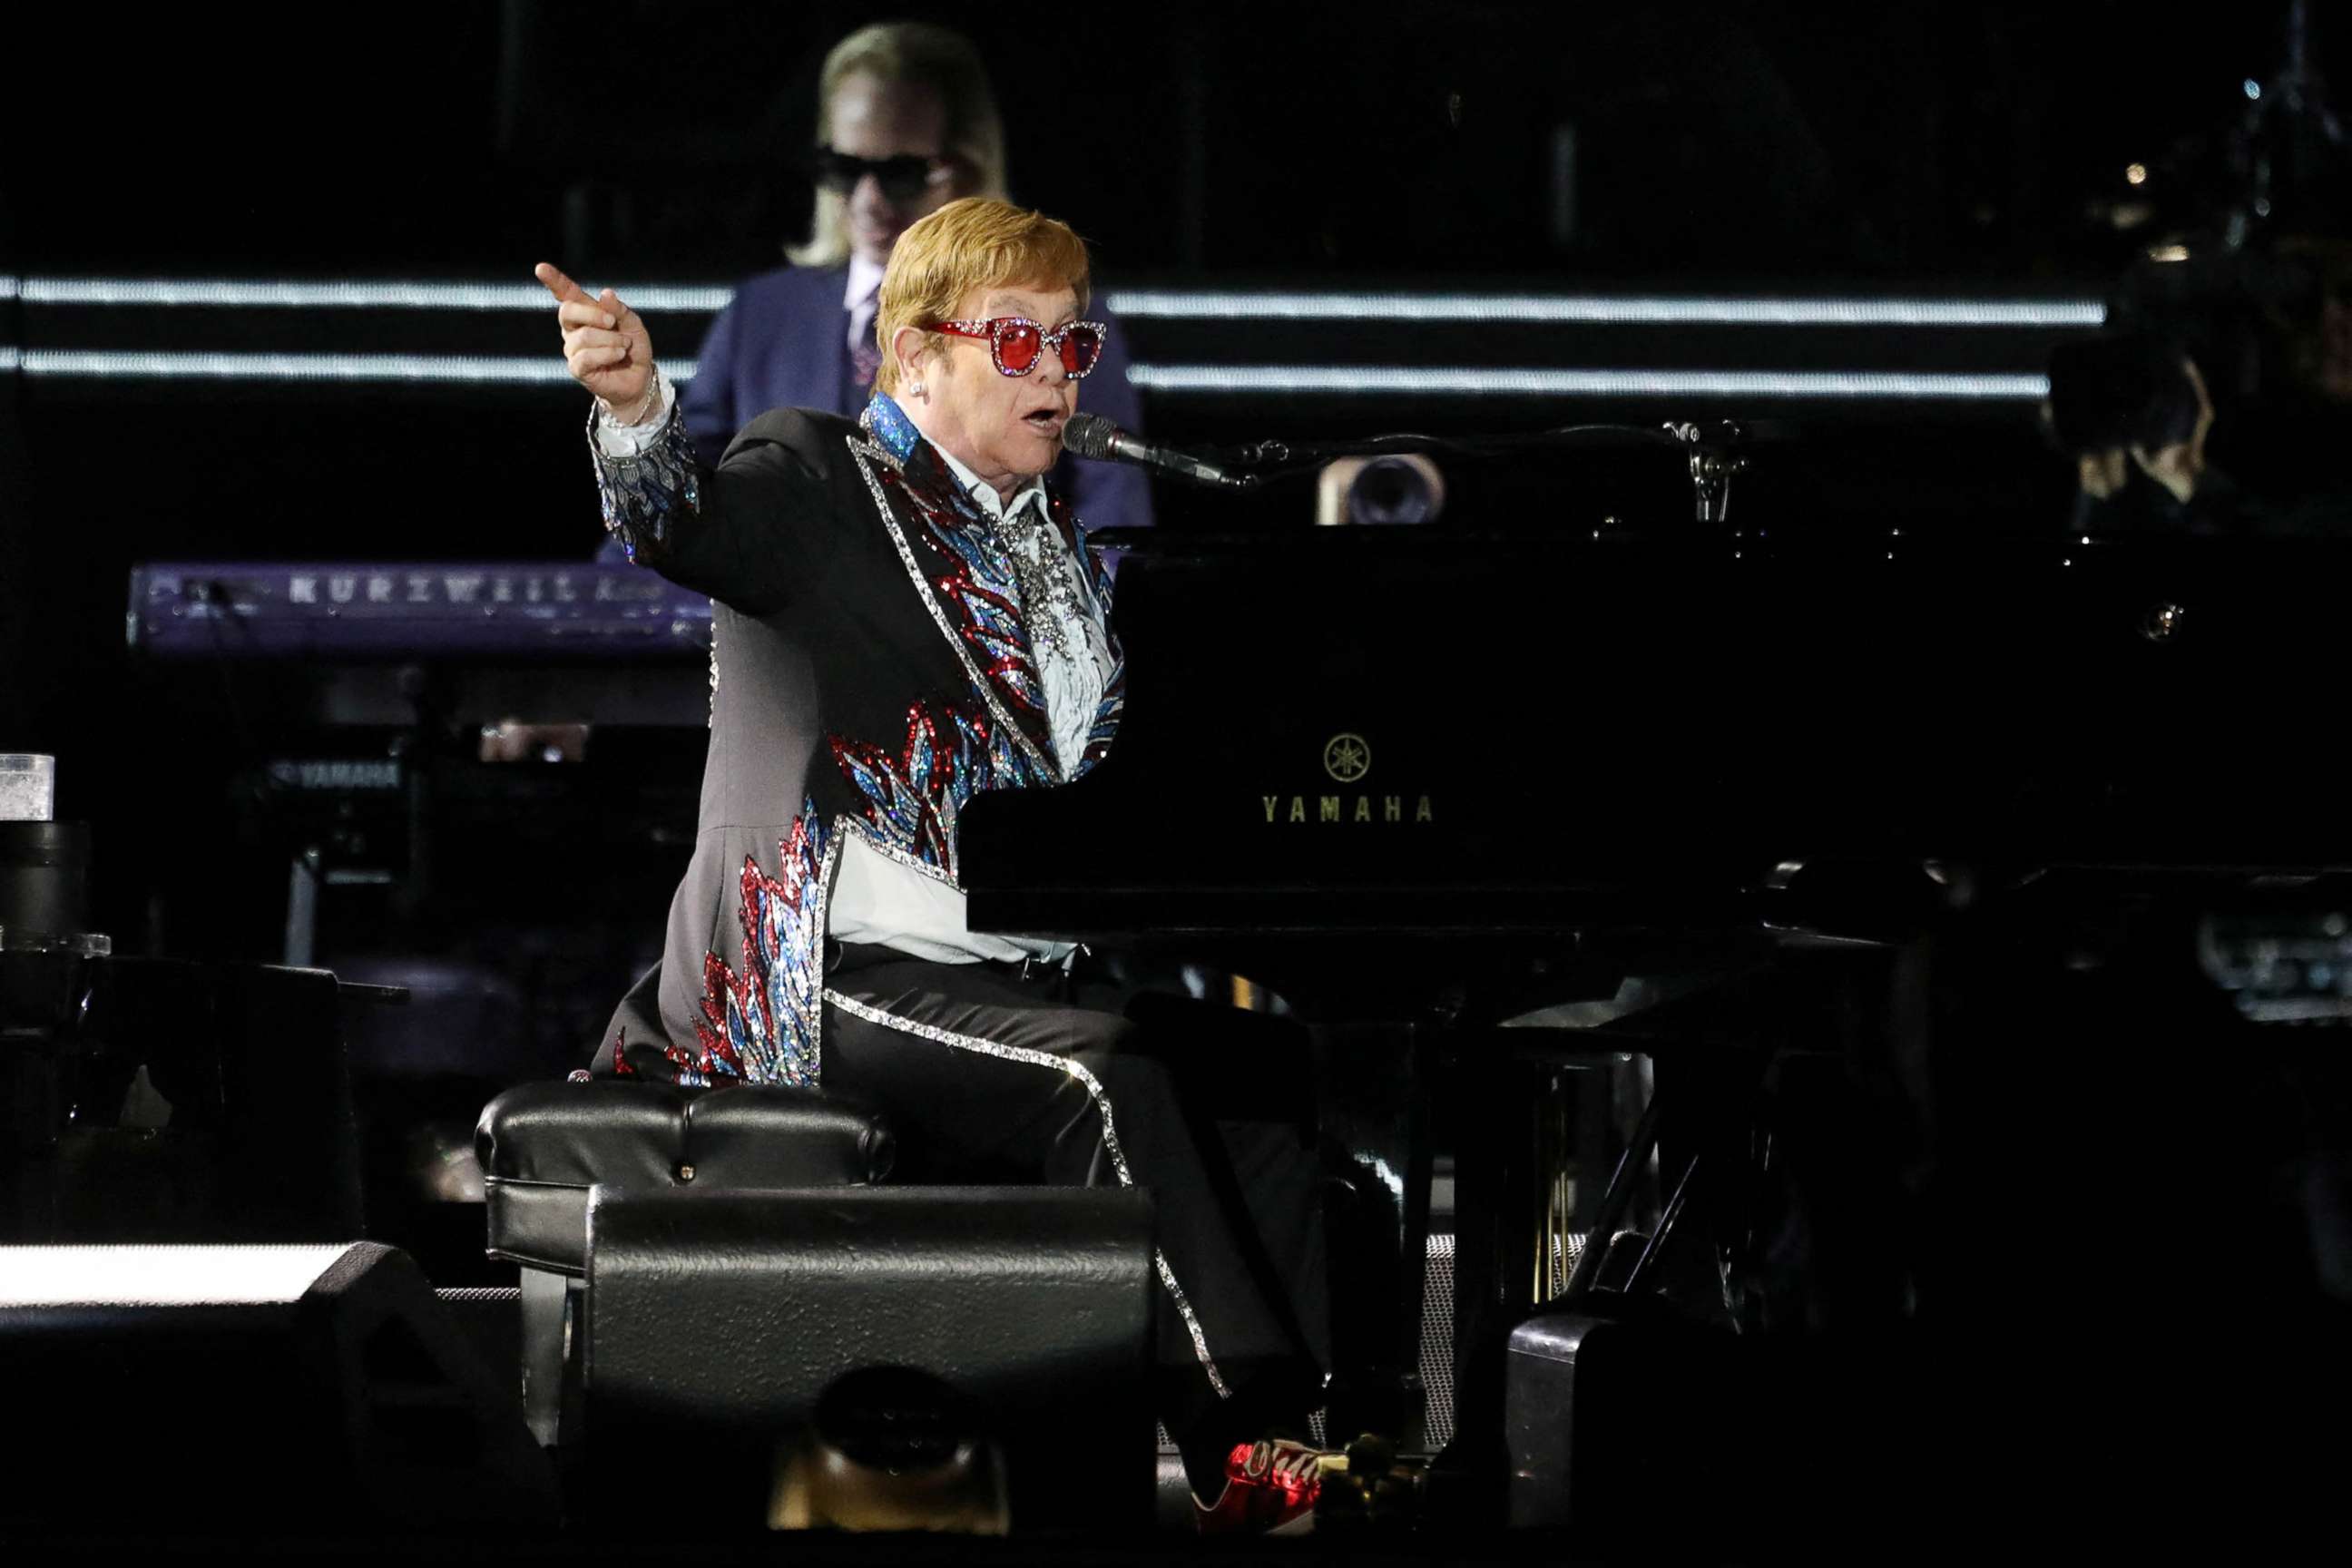 PHOTO: Elton John performs "Bennie and the Jets" as he wraps up the U.S. leg of his 'Yellow Brick Road' tour at Dodger Stadium in Las Angeles, Nov. 20, 2022.